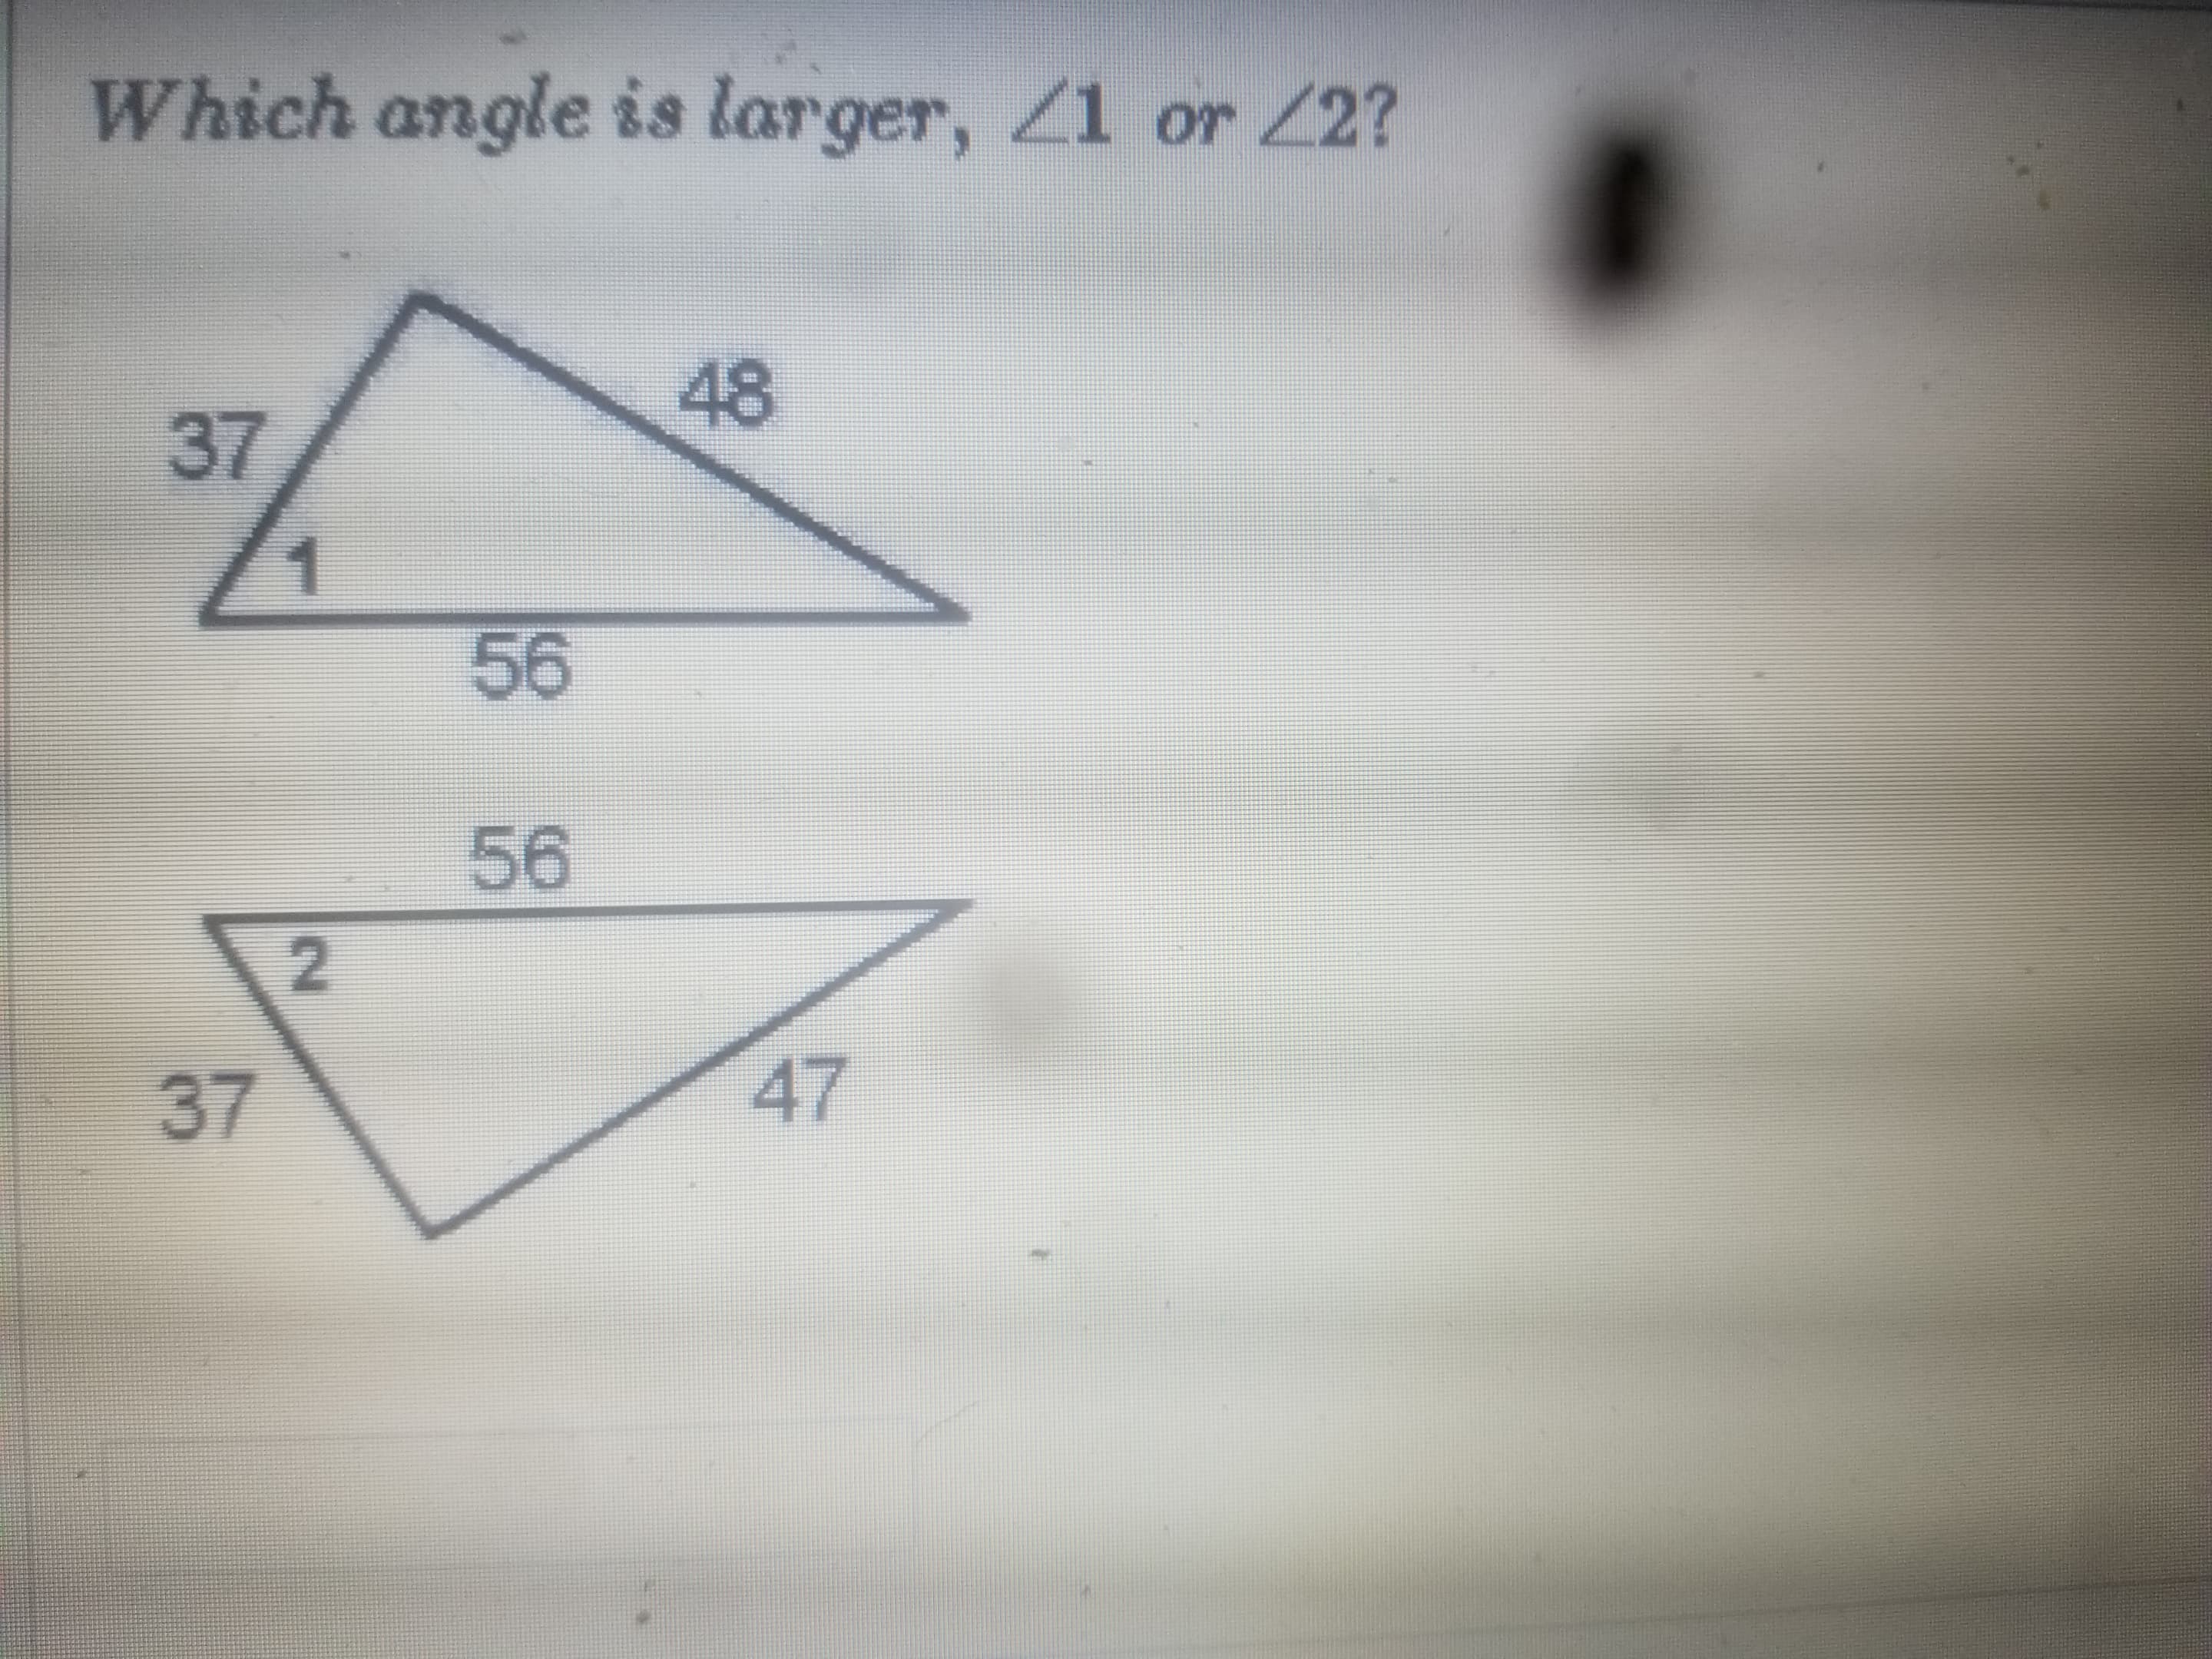 Which angle is larger, Z1 or Z2?
48
37
1
56
56
37
47
2.
